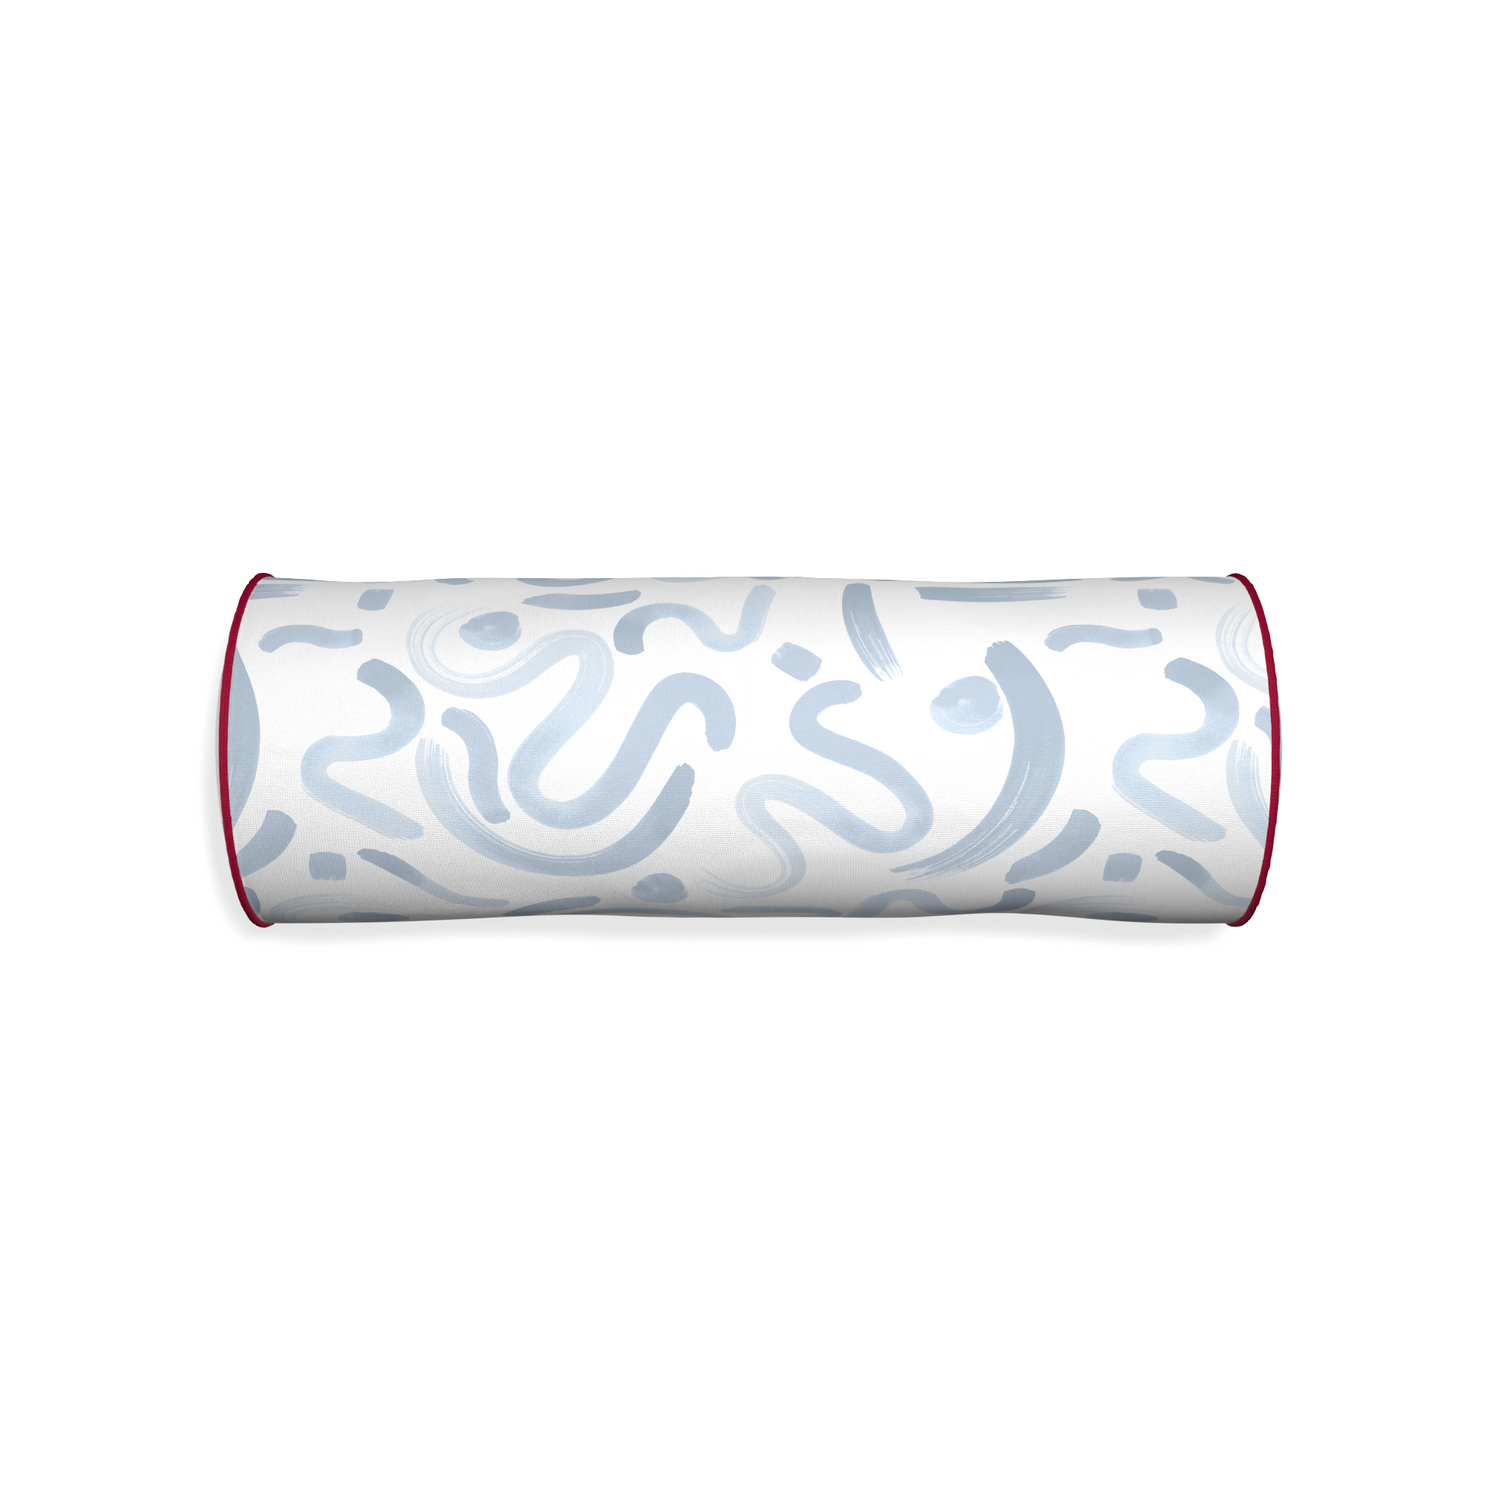 Bolster hockney sky custom abstract sky bluepillow with raspberry piping on white background